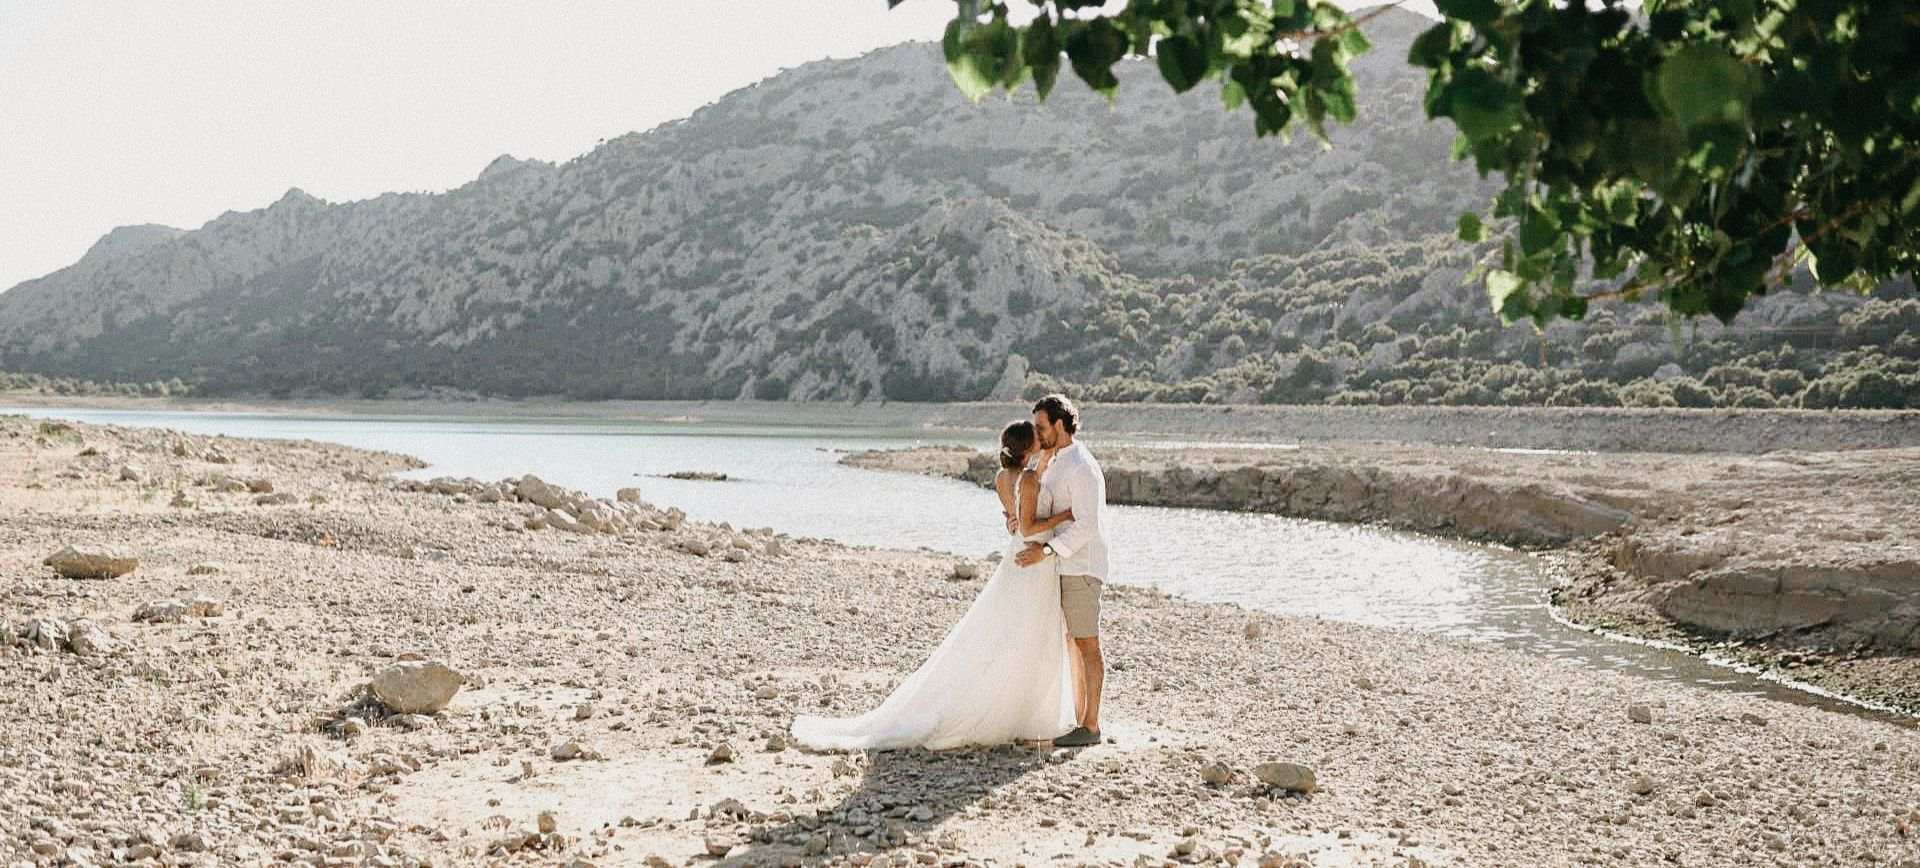 mallorca elopement package in spain - wedding in the wilderness